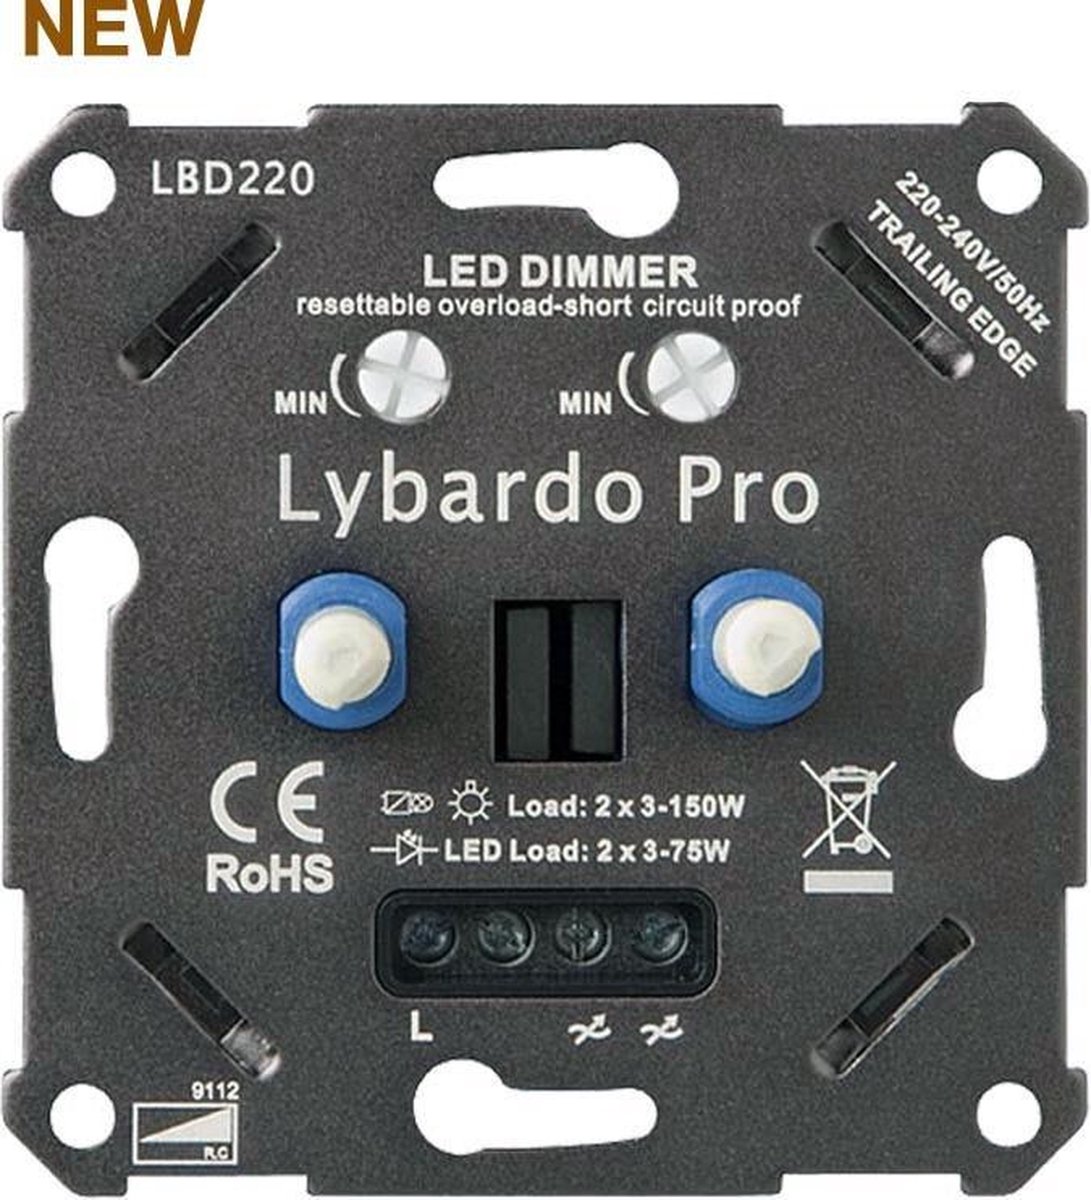 bol.com | Lybardo ITEC 2 x 3-75W Pro LED Duo Dimmer - Fase Afsnijding -  Universeel -...